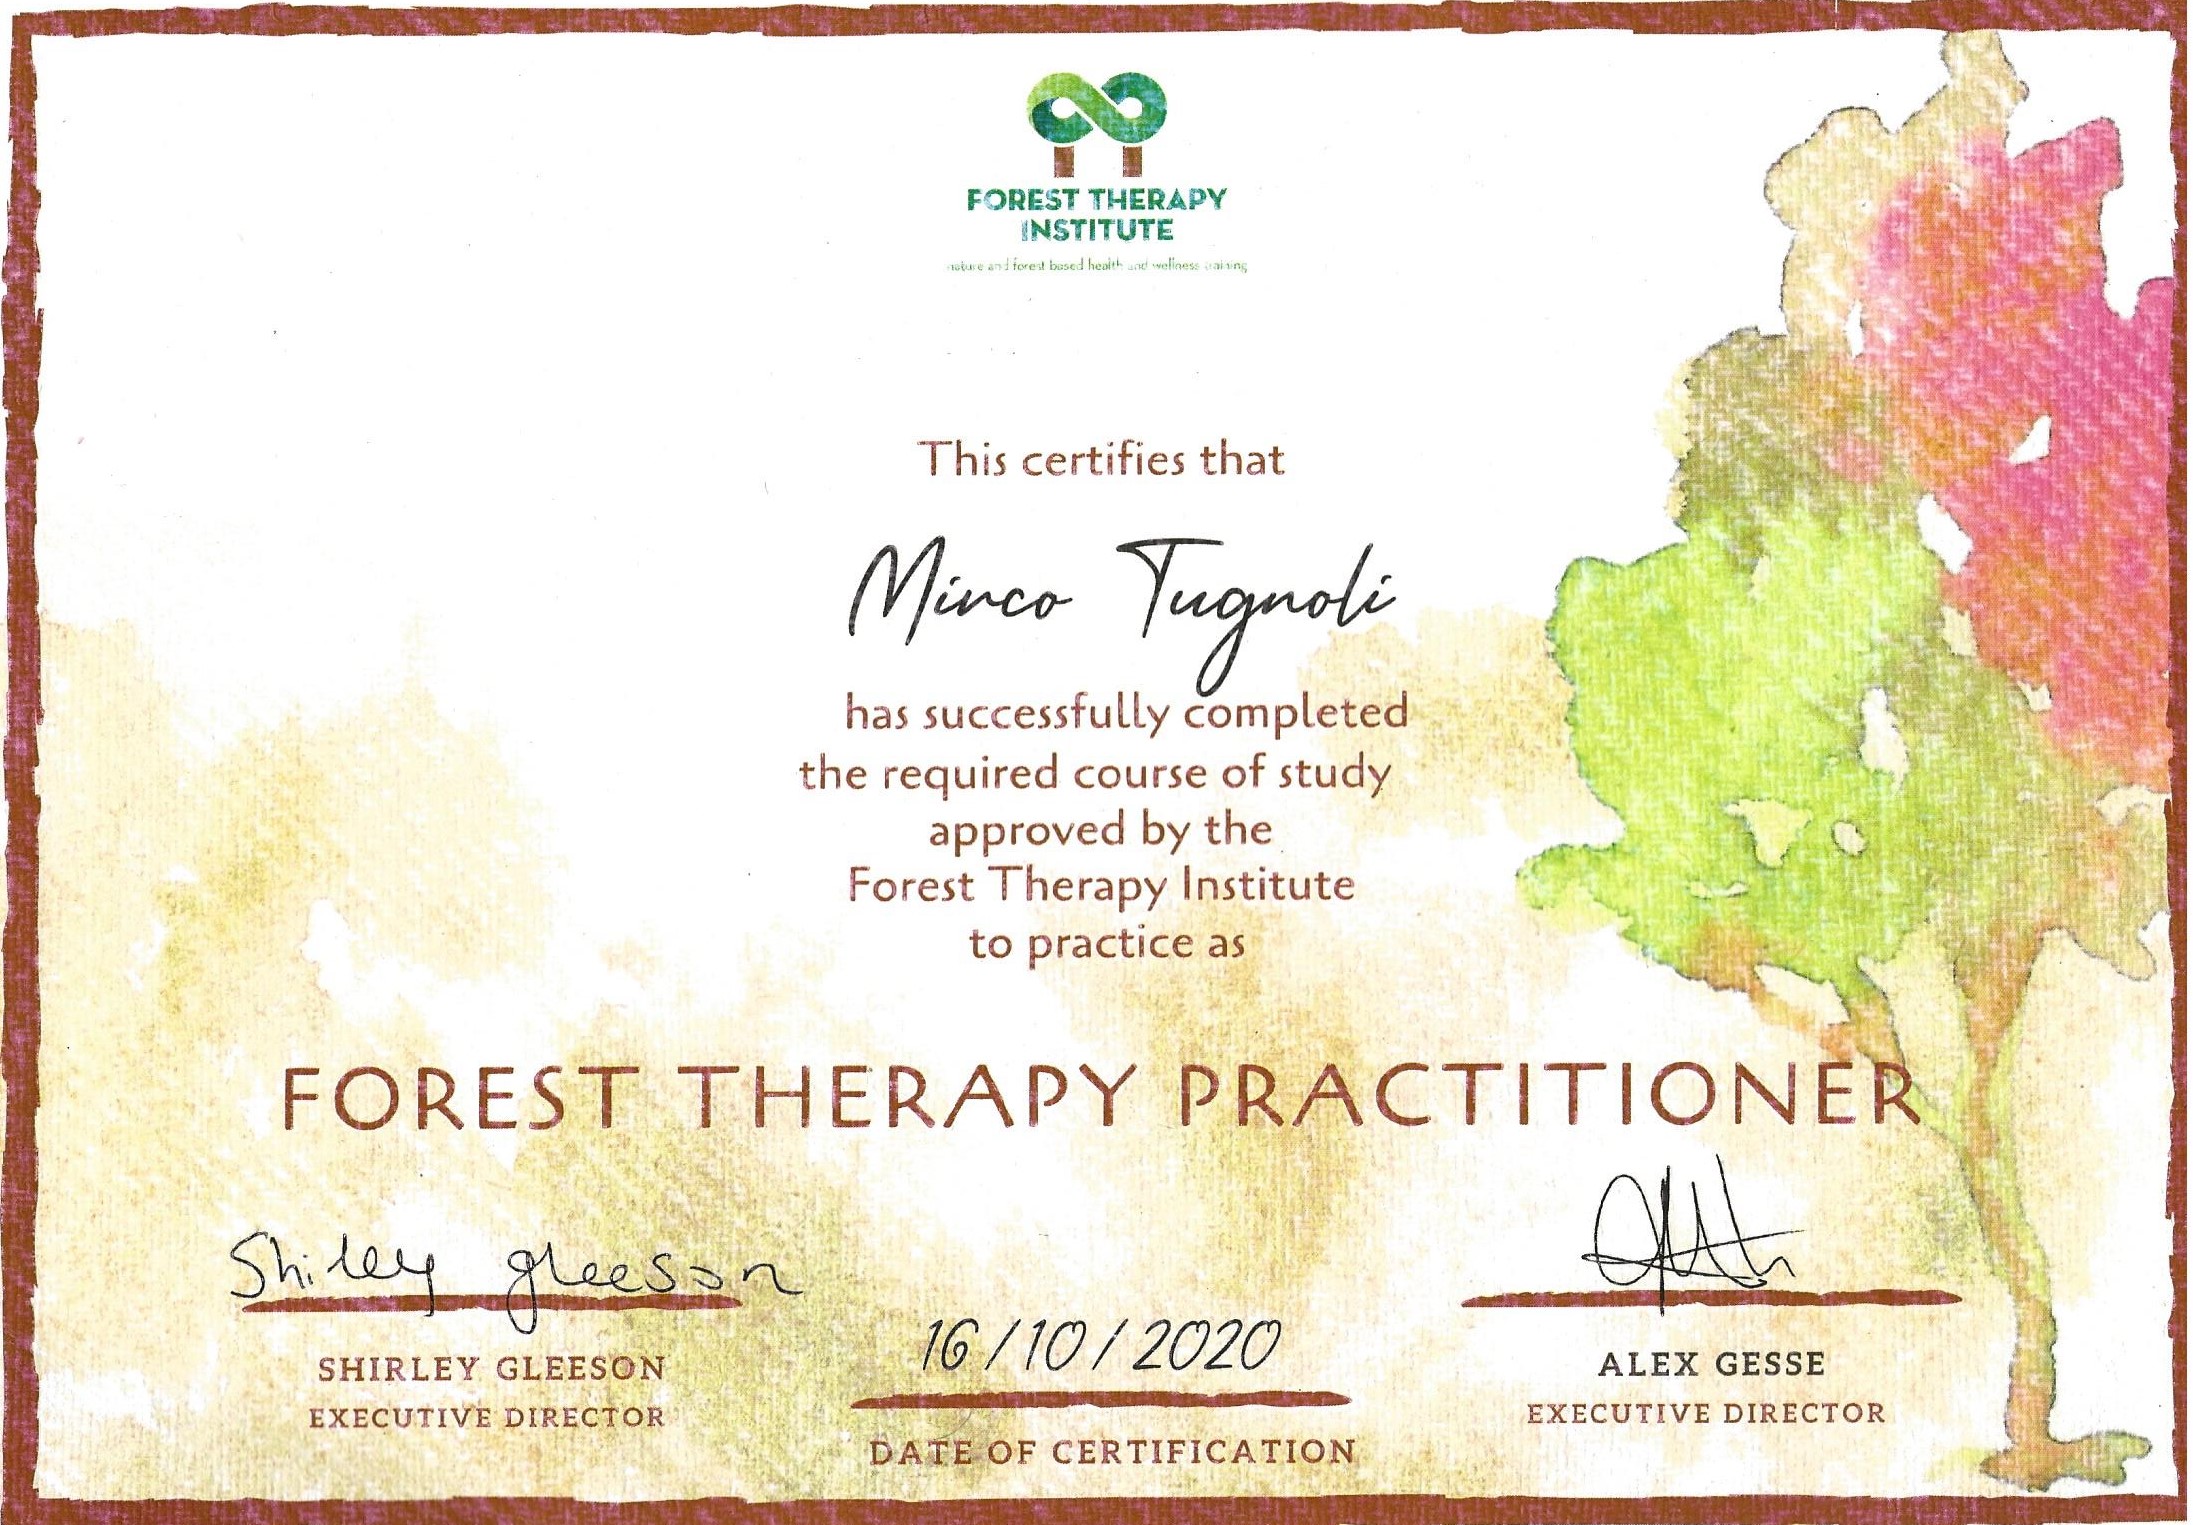 certificazione_foresttherapy_mod